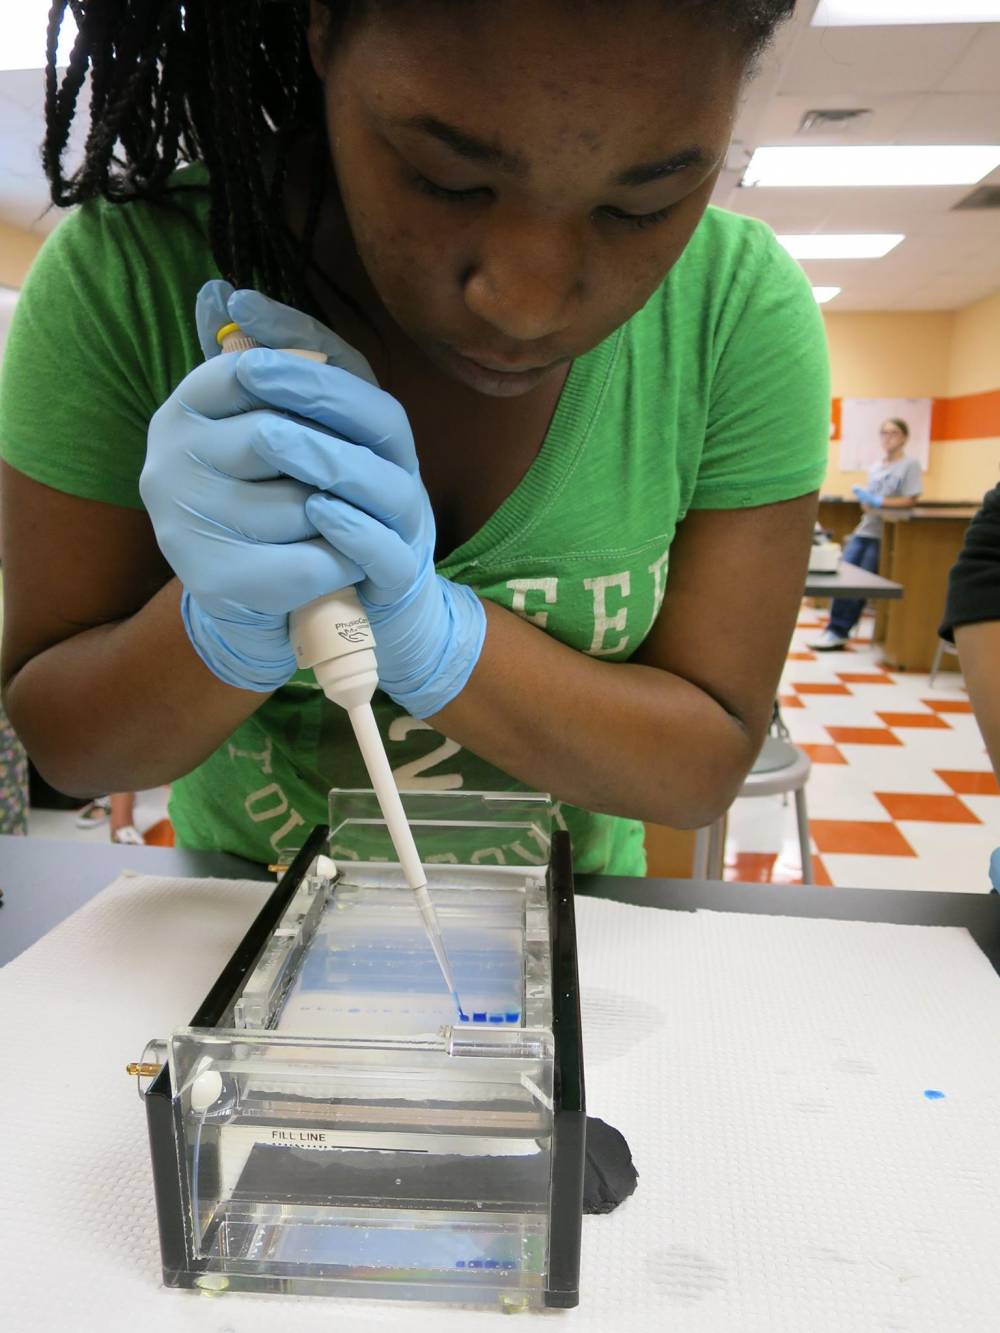 TOP SOUTH CAROLINA SCIENCE CAMP: Clemson University Summer Science Camps is a Top Science Summer Camp located in Clemson South Carolina offering many fun and enriching Science and other camp programs. 